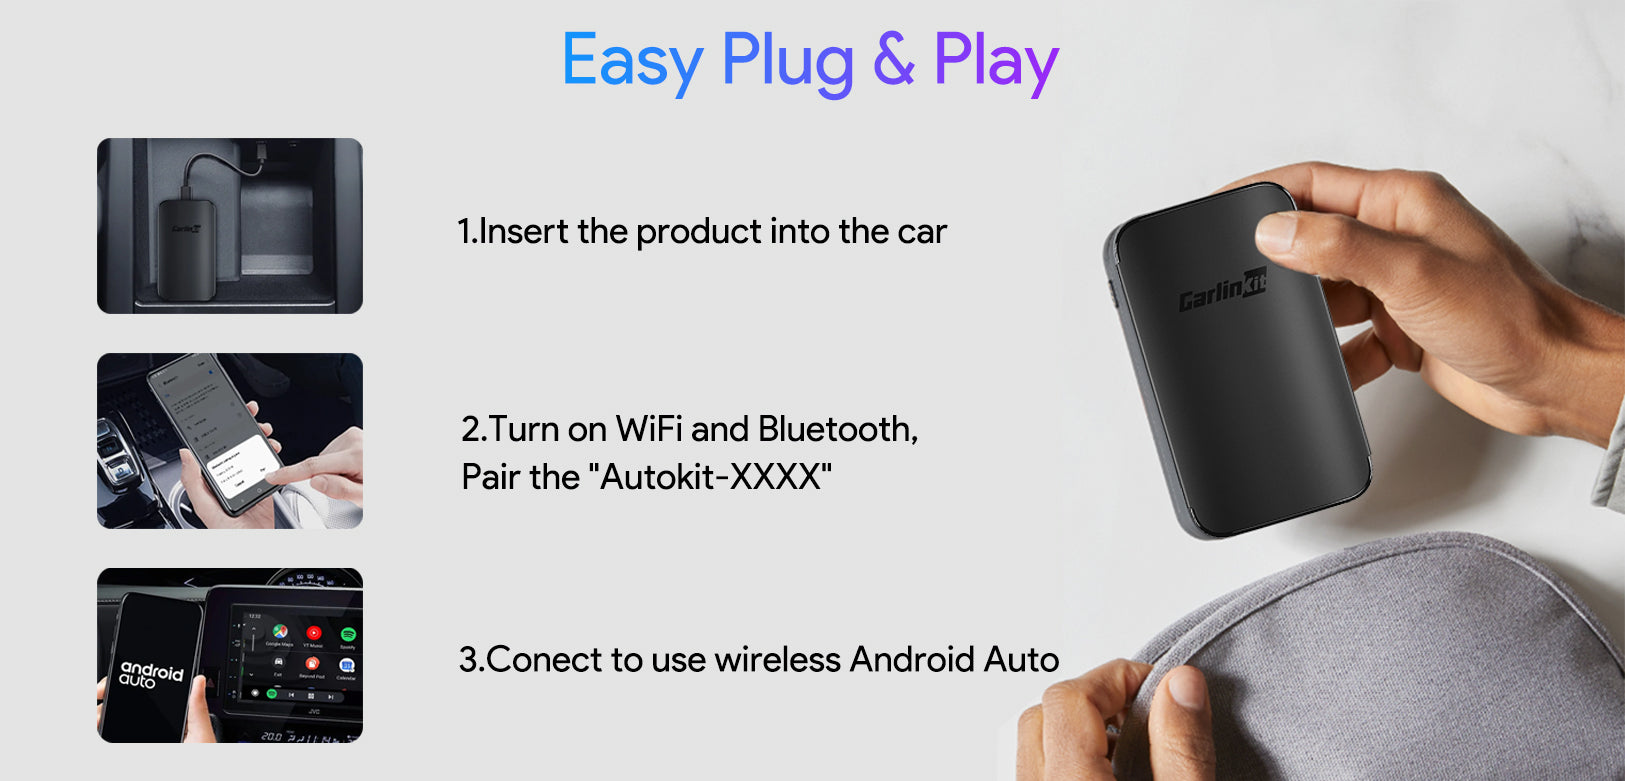 Carlinkit A2A Wireless Android Auto Adapter 